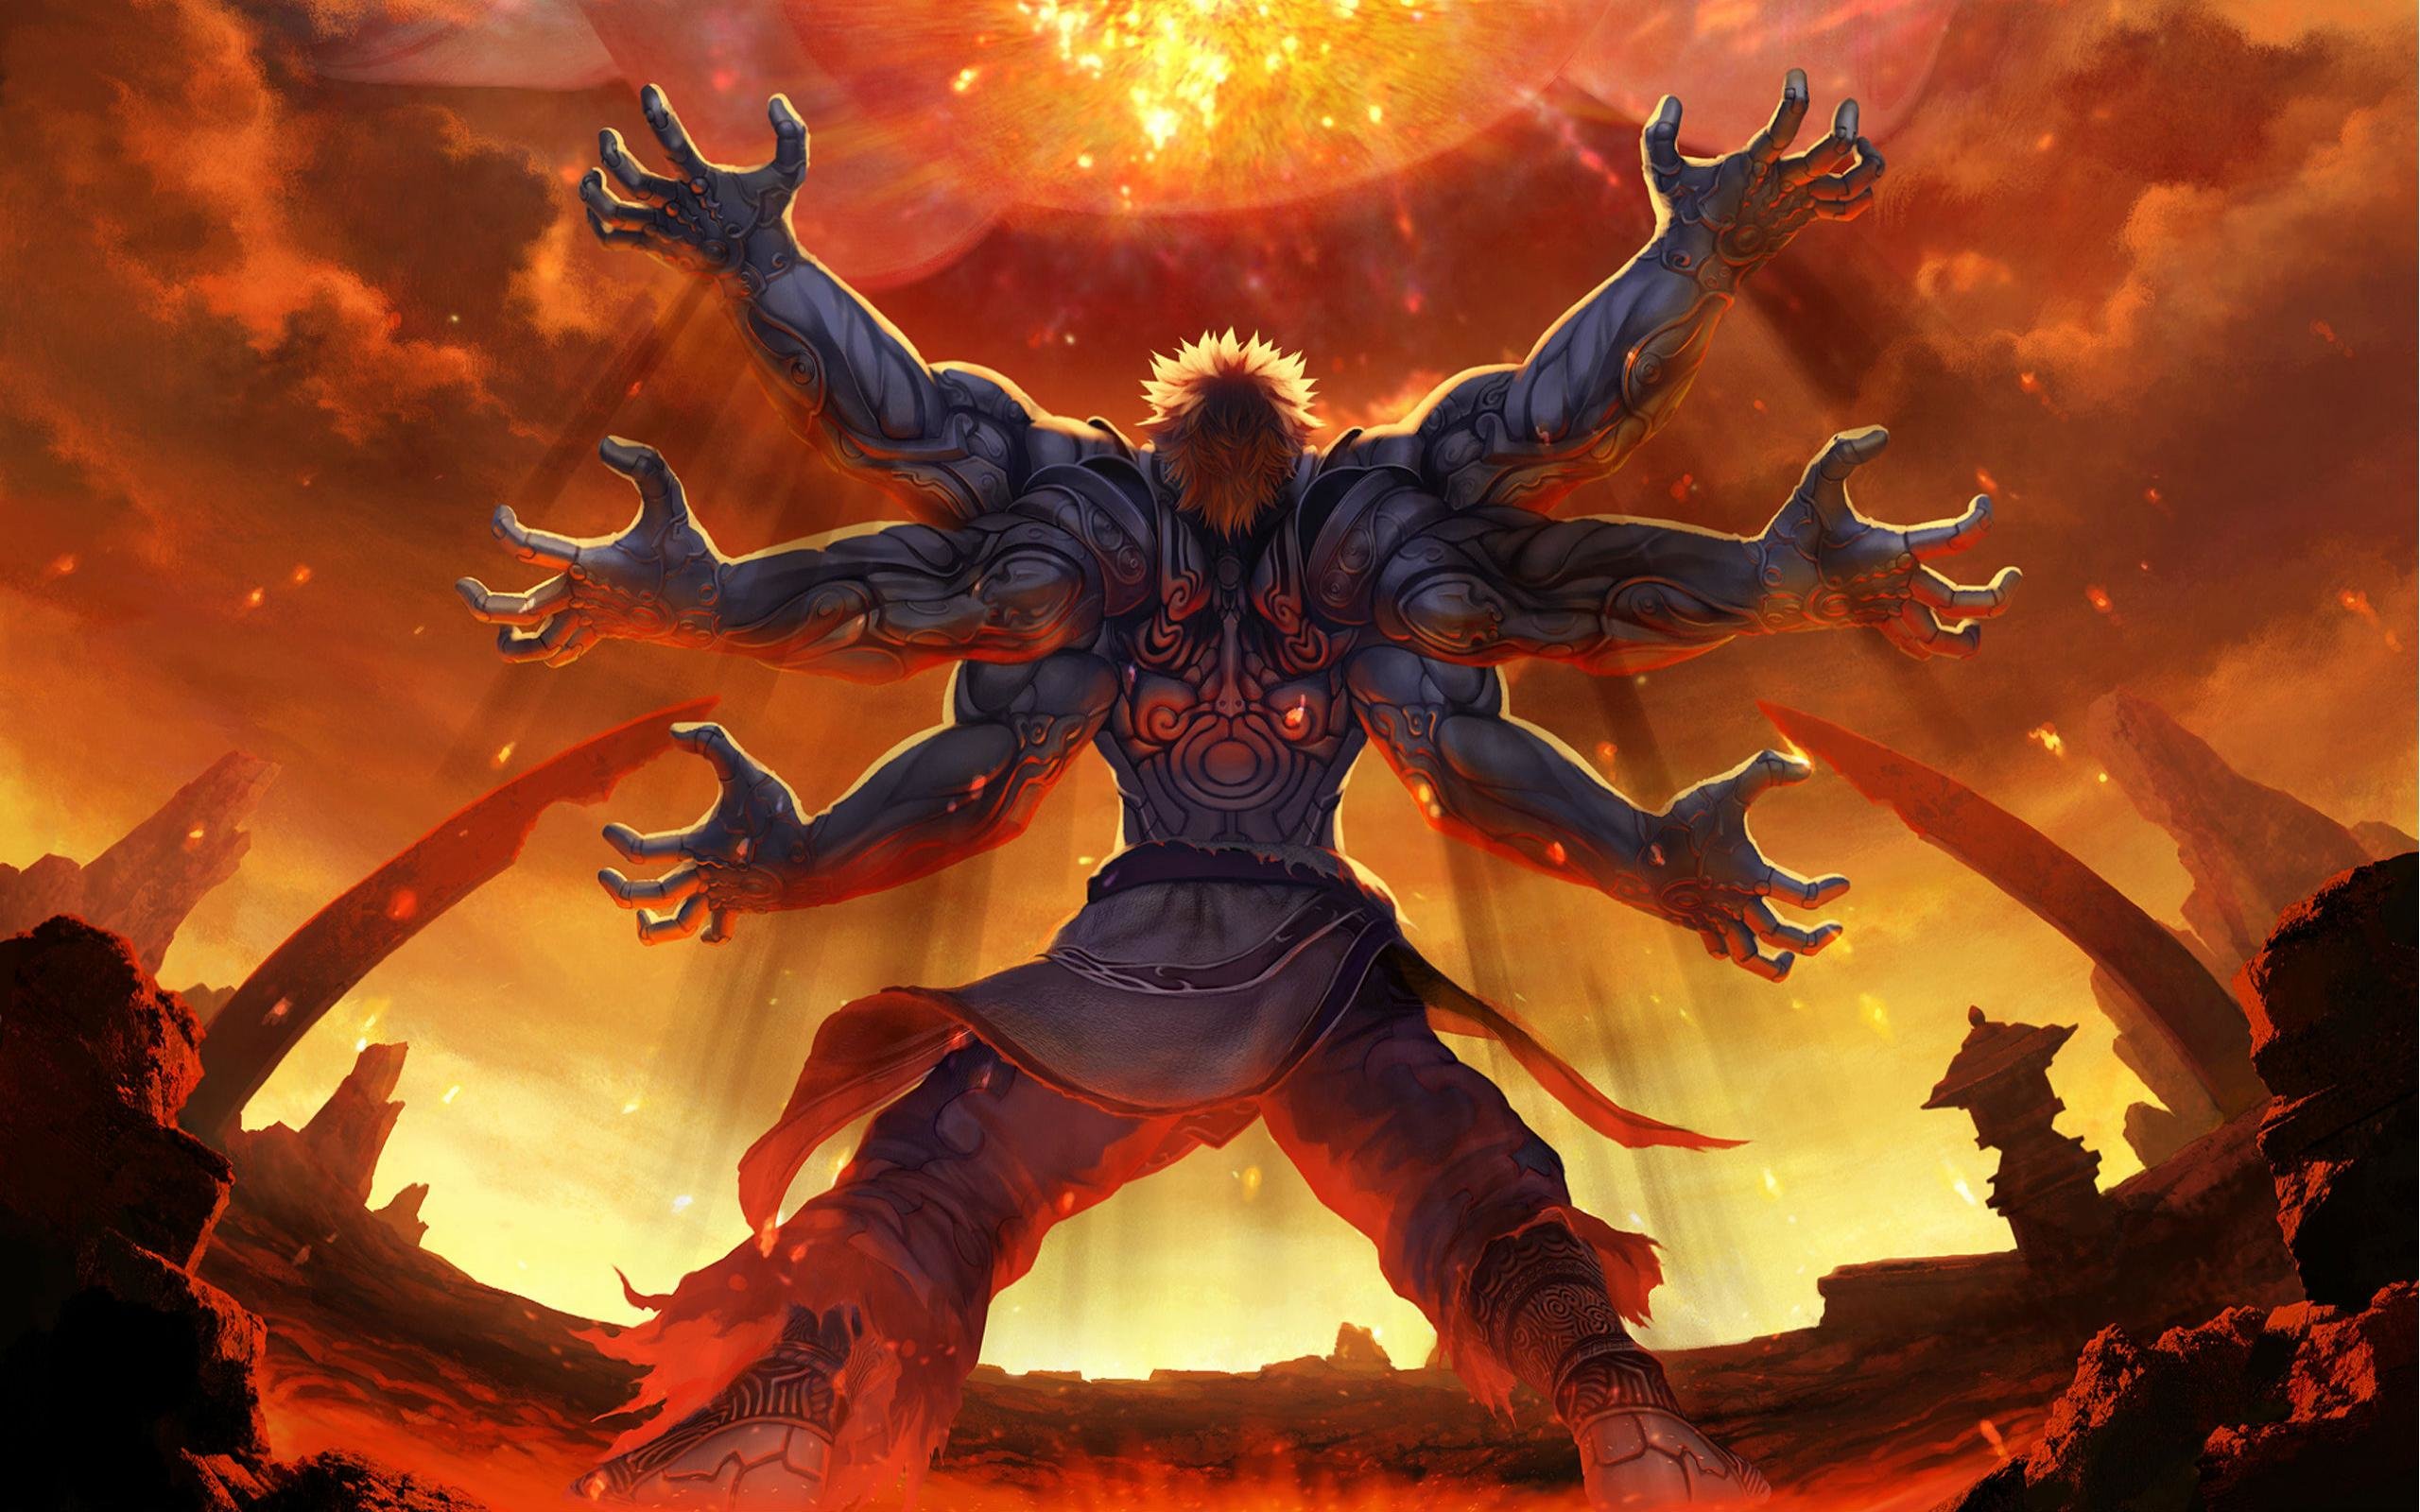 Download hd 2560x1600 Asura's Wrath desktop background ID:6939 for free